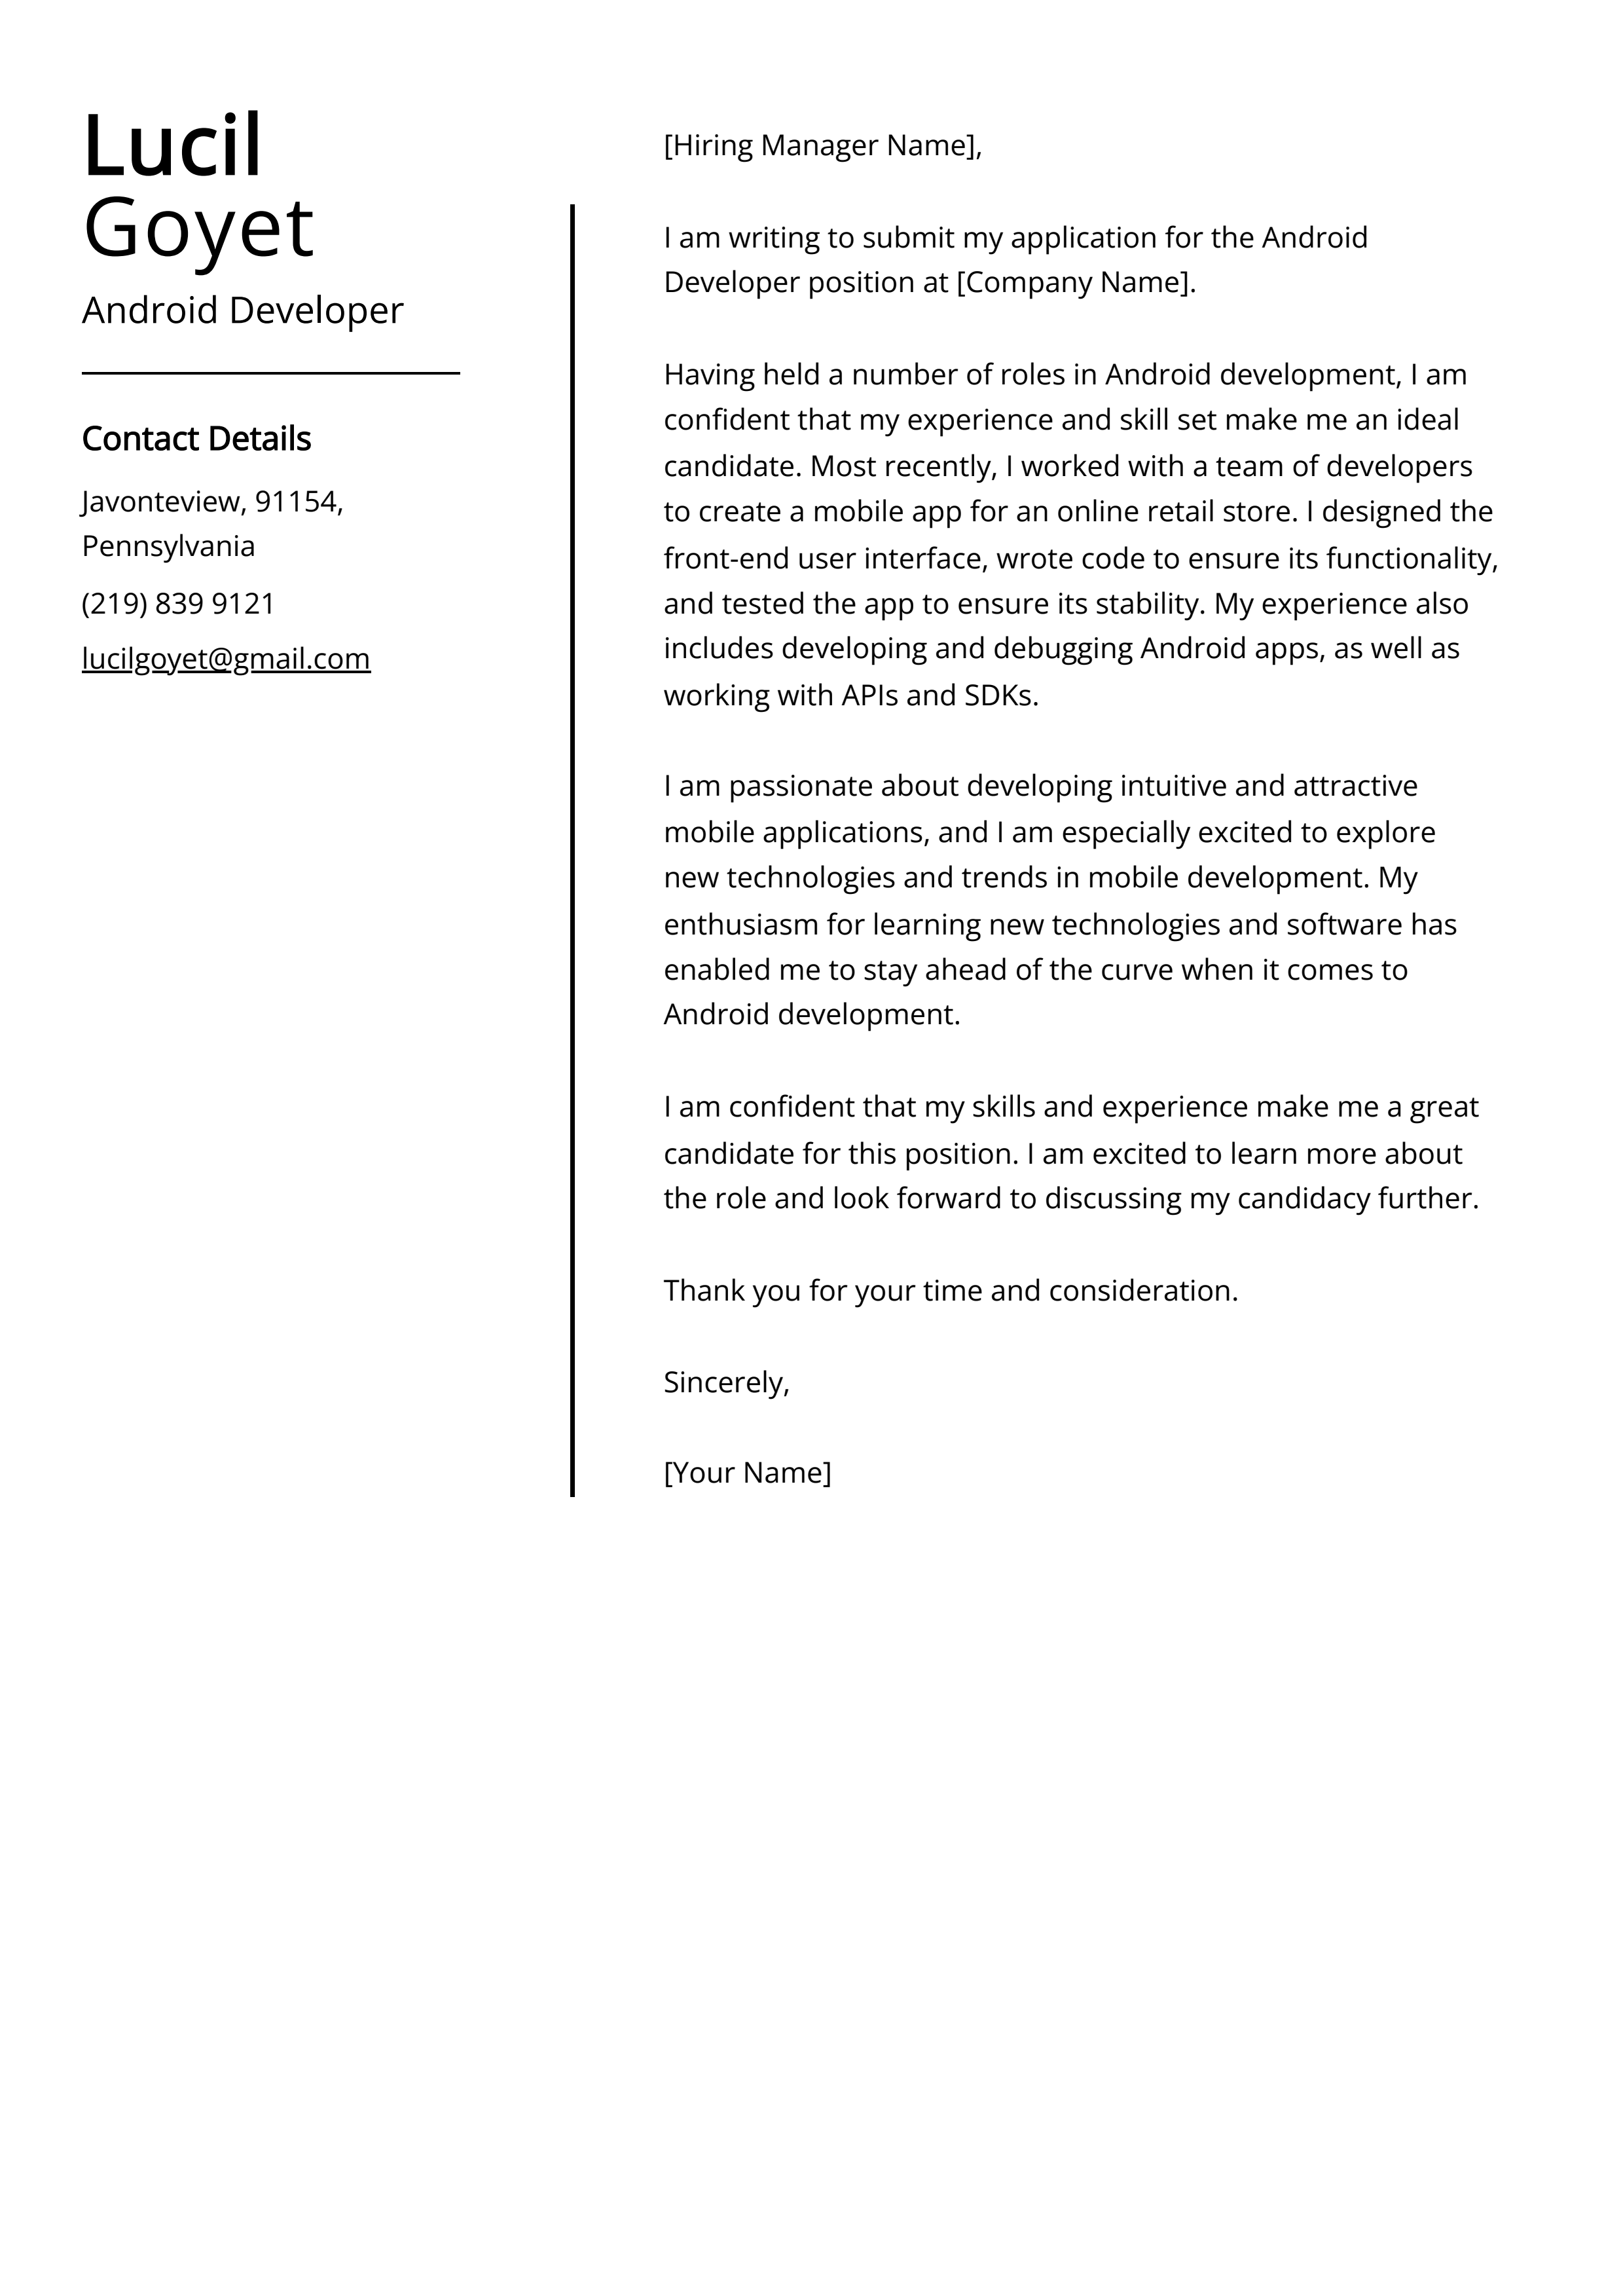 Android Developer Cover Letter Example